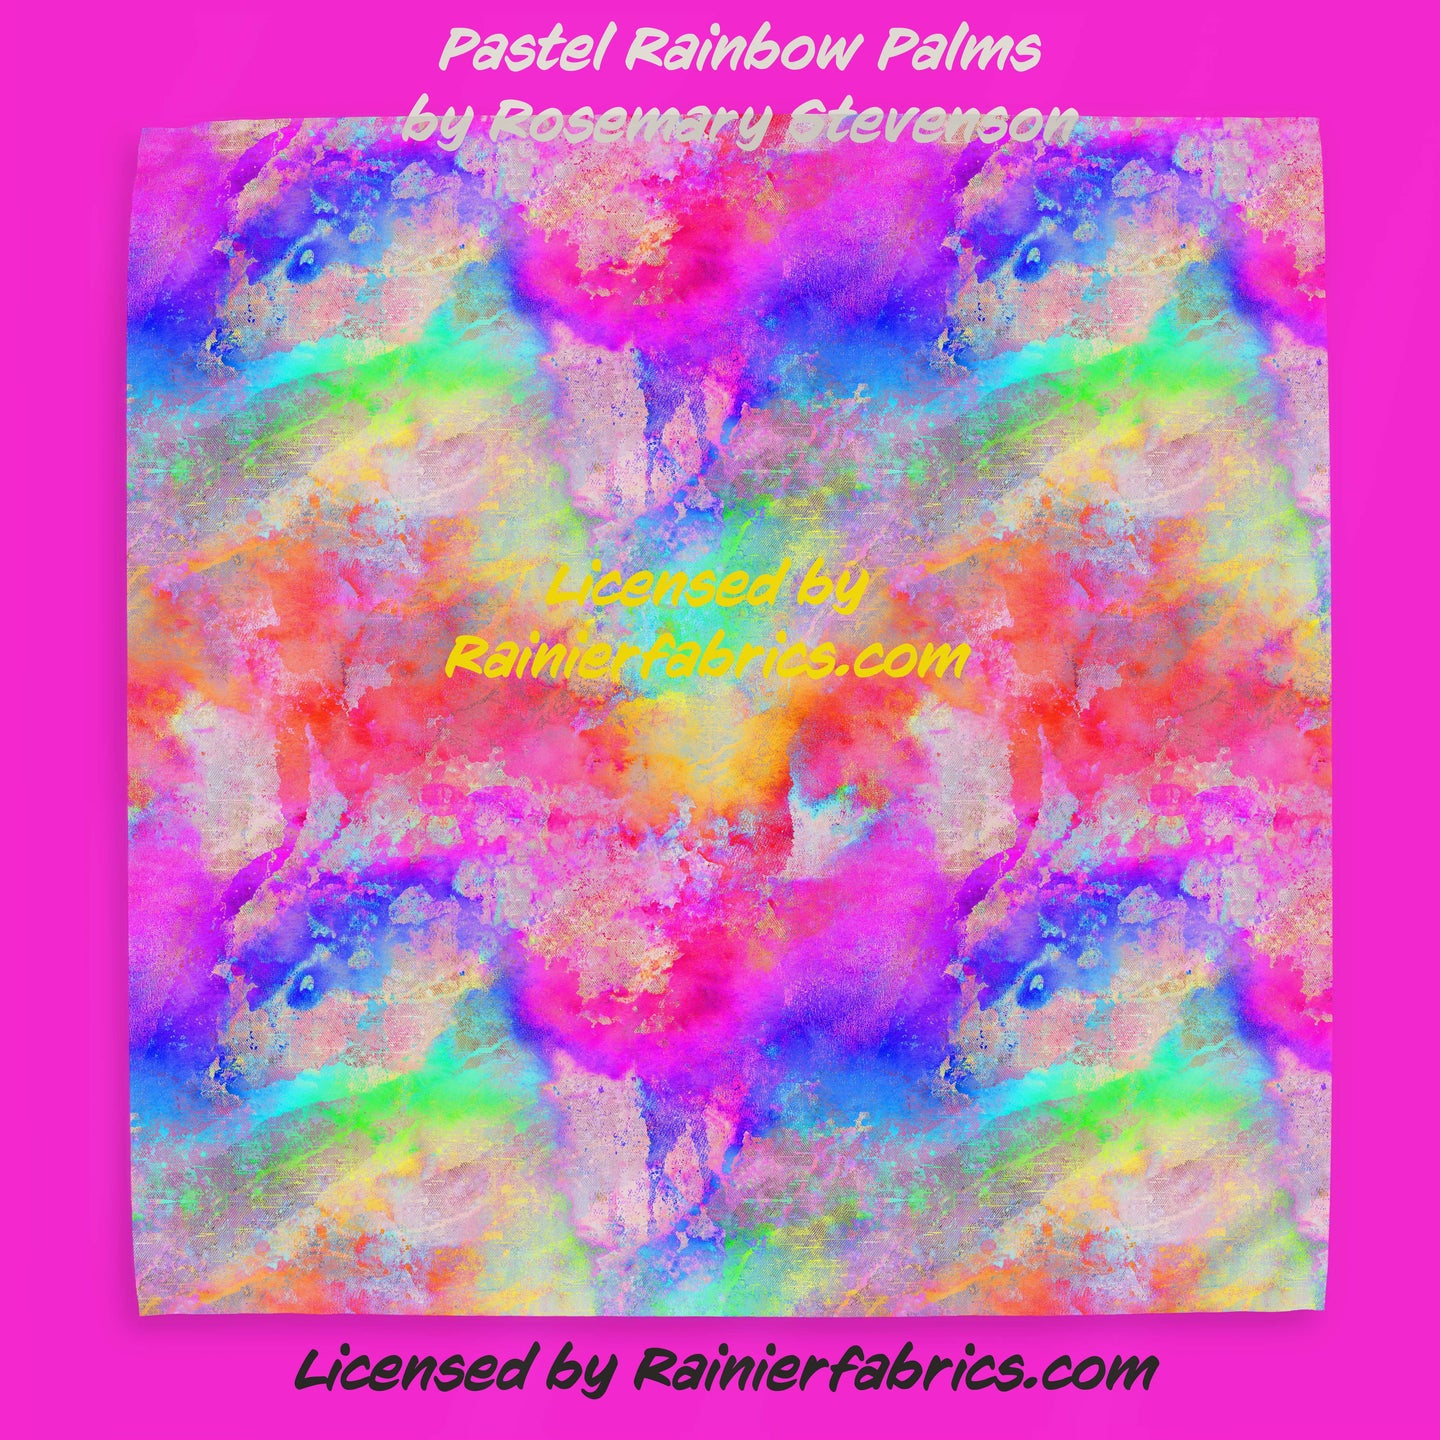 Pastel Rainbow Palms by Rosemary Stevenson - TAT 2-5 Days (Turn around time) - Order by 1/2 yard; Description of bases below